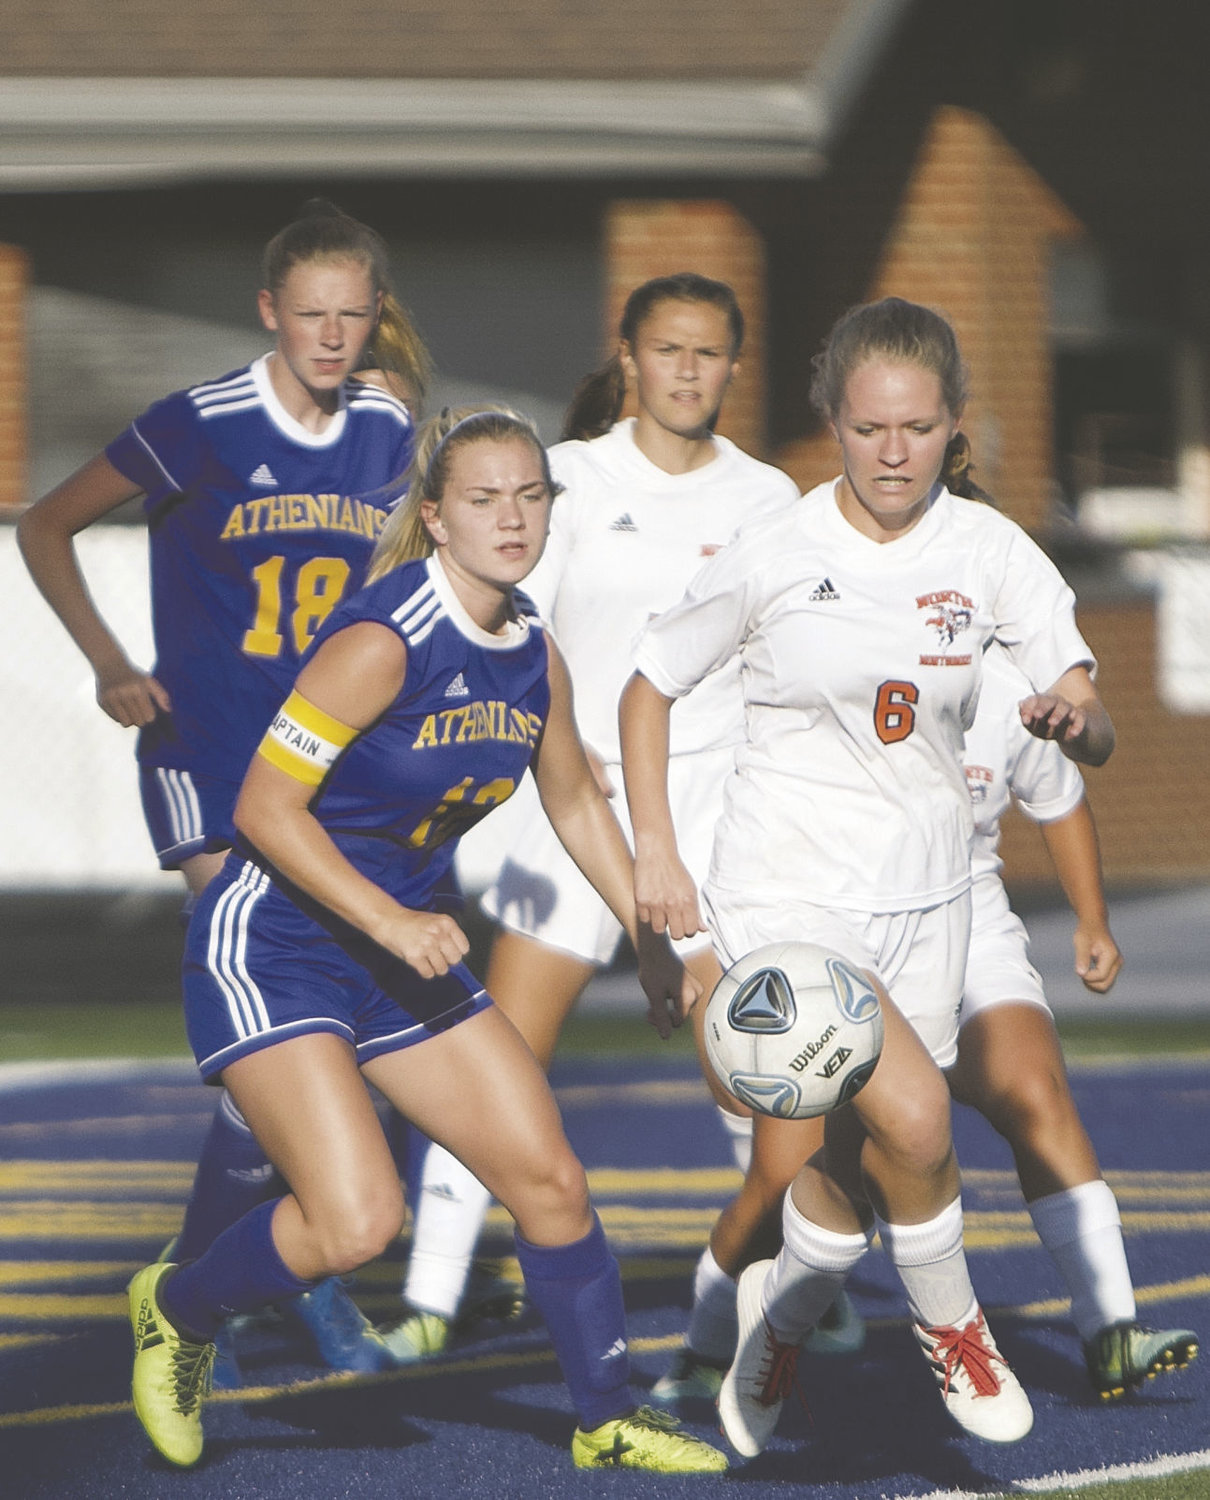 Crawfordsville's Faith Rogers and North Montgomery's Haley Sommer both chase after the ball.